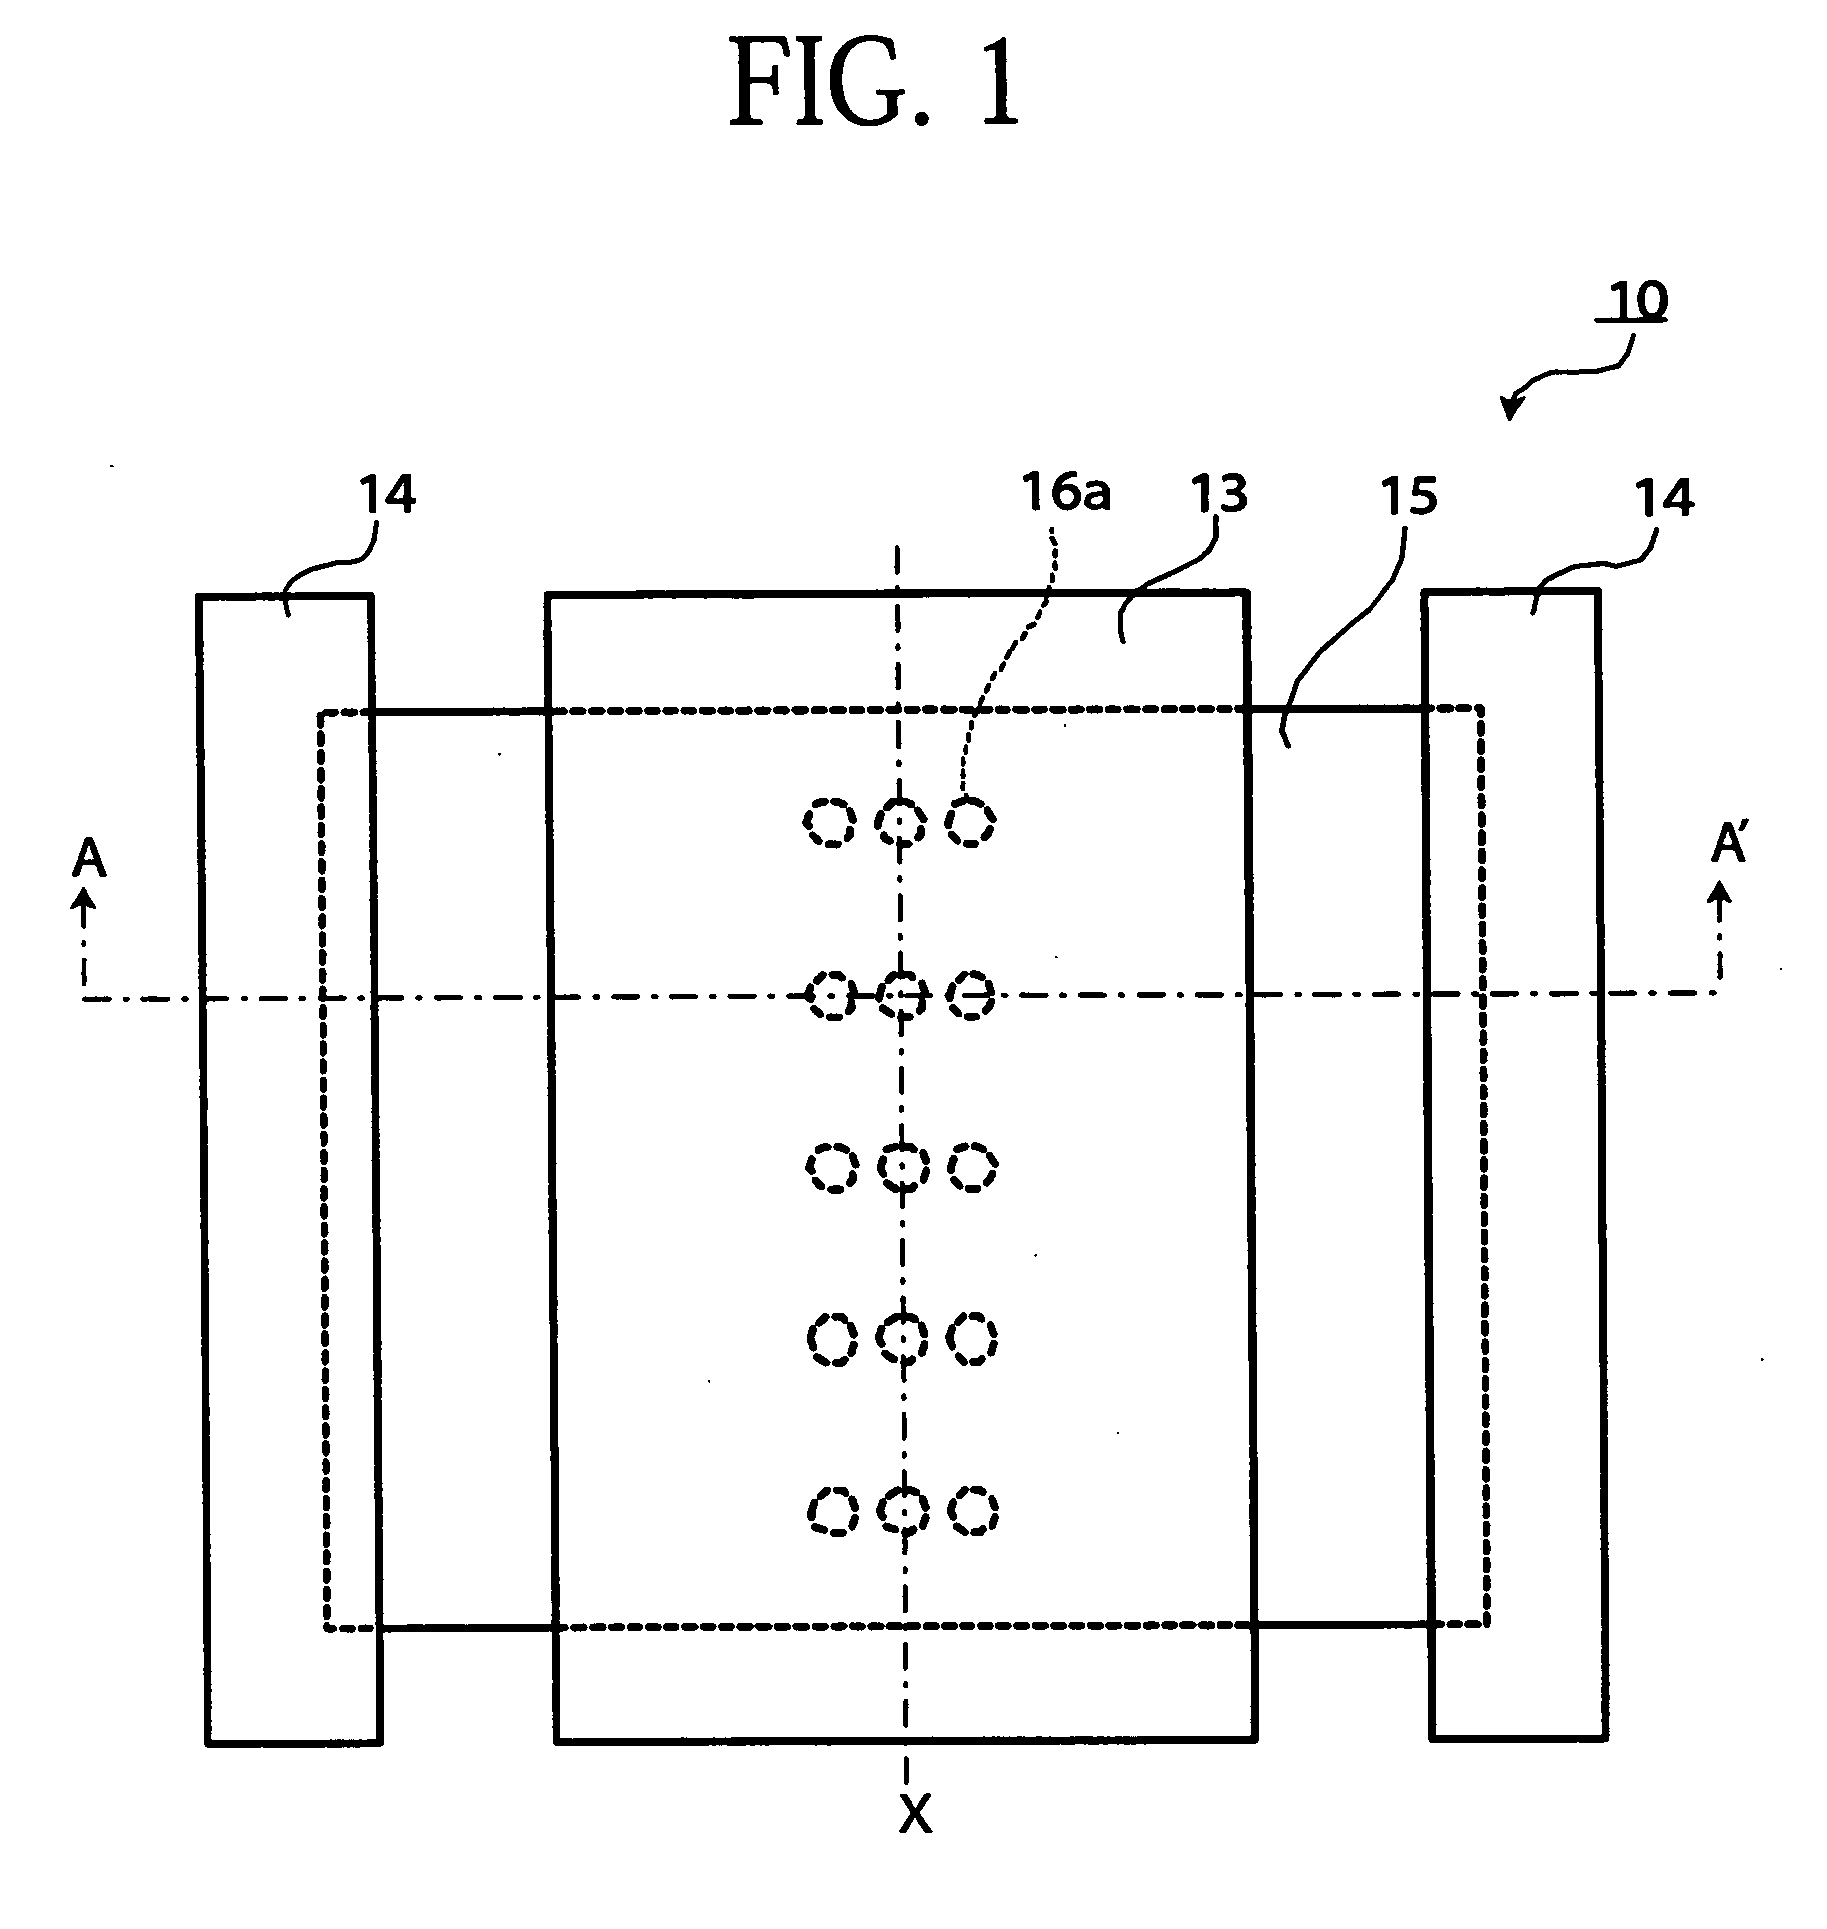 Thermoelectric element